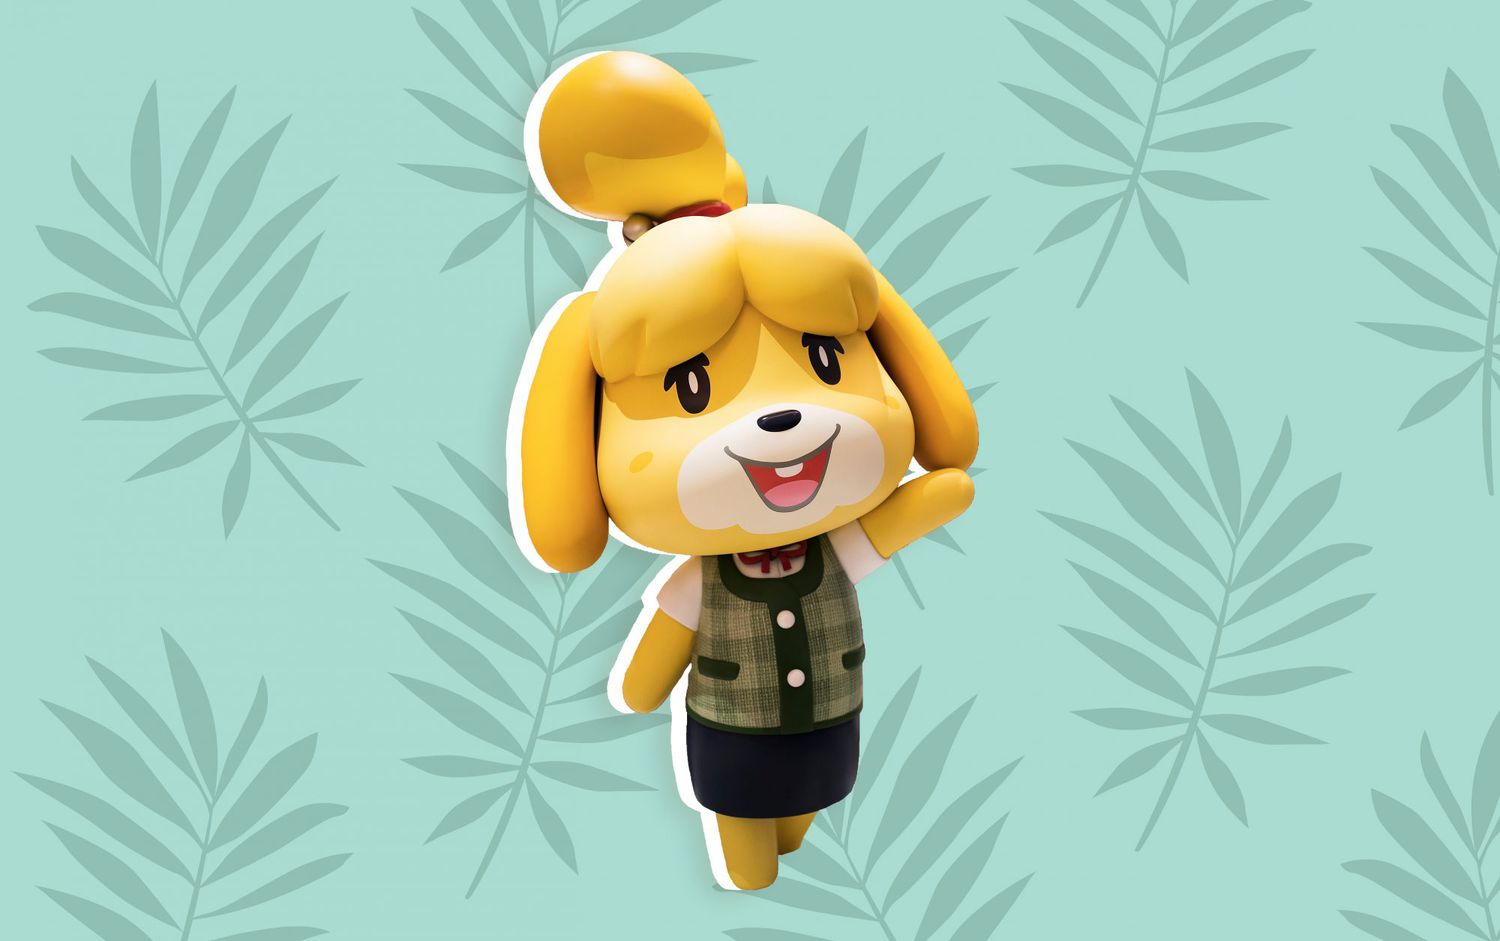 Nintendo game character Isabelle from Animal Crossing on a patterned background